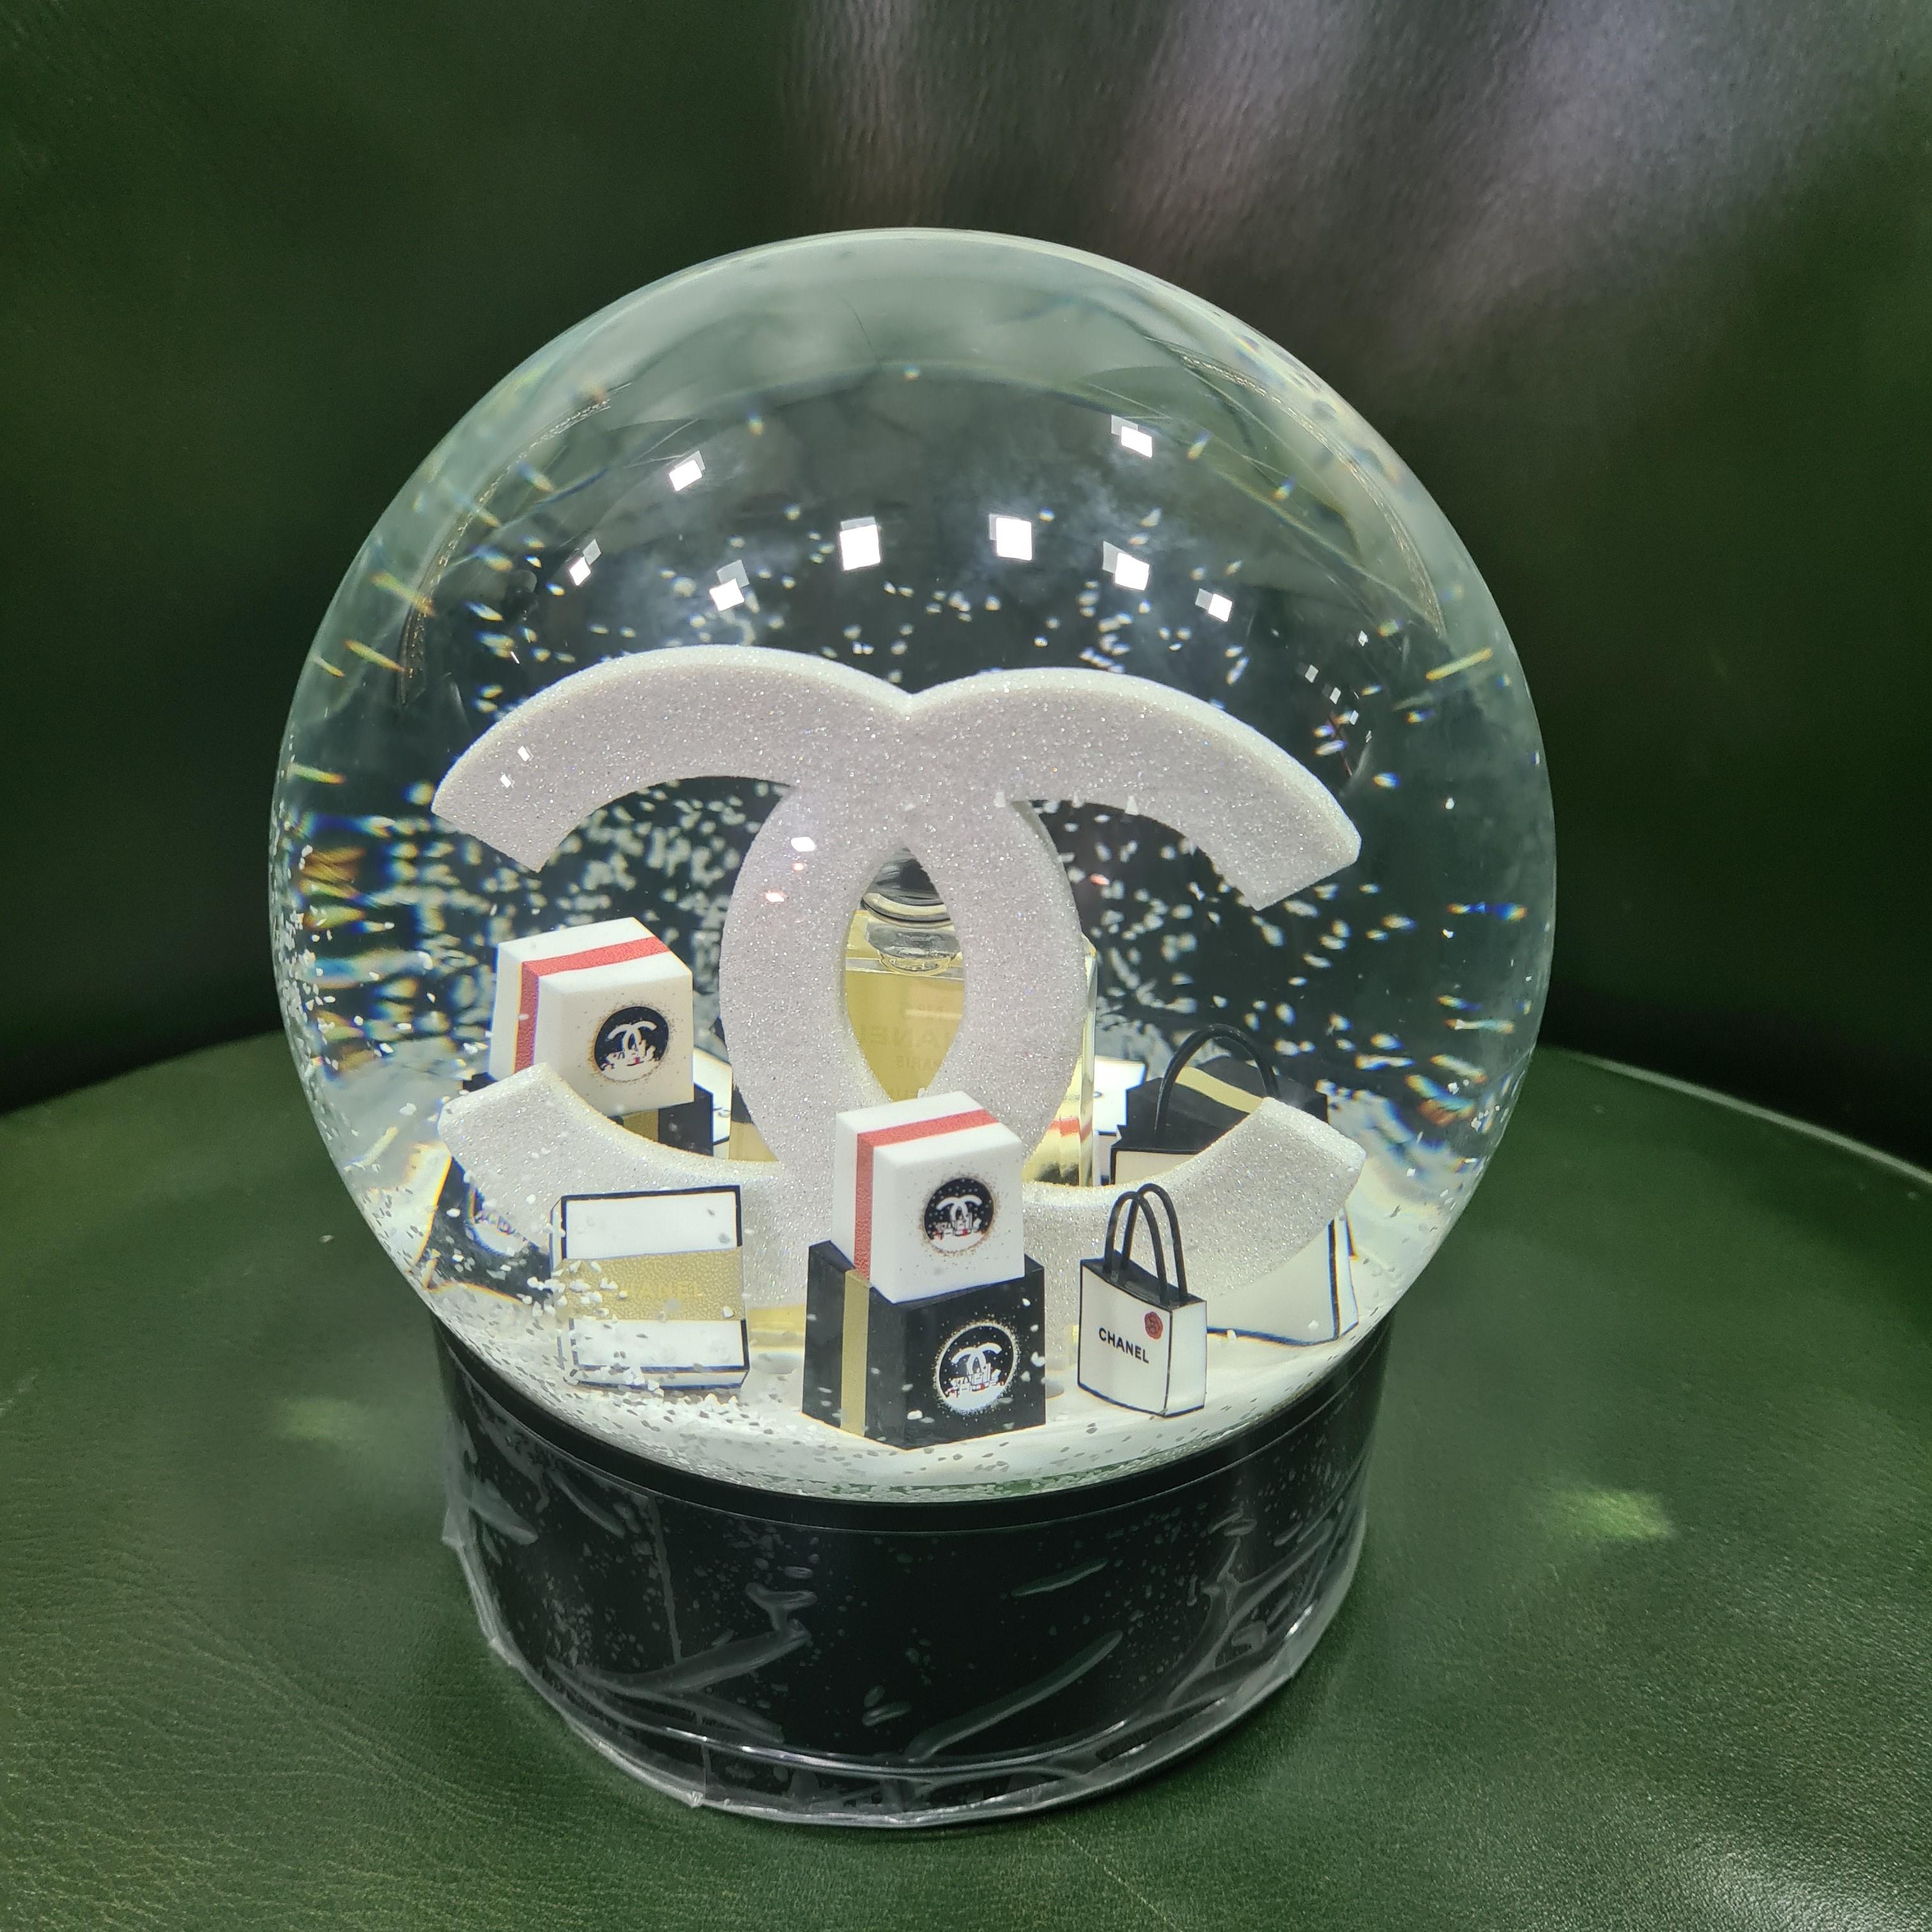 Snow globe CHANEL Parfum n°5
It is the XXL decoration object for Chanel collectors. This snow globe is electric and will be delivered with its usb charger. It is new and the plastic protection is still present on the base. The on/off button is under